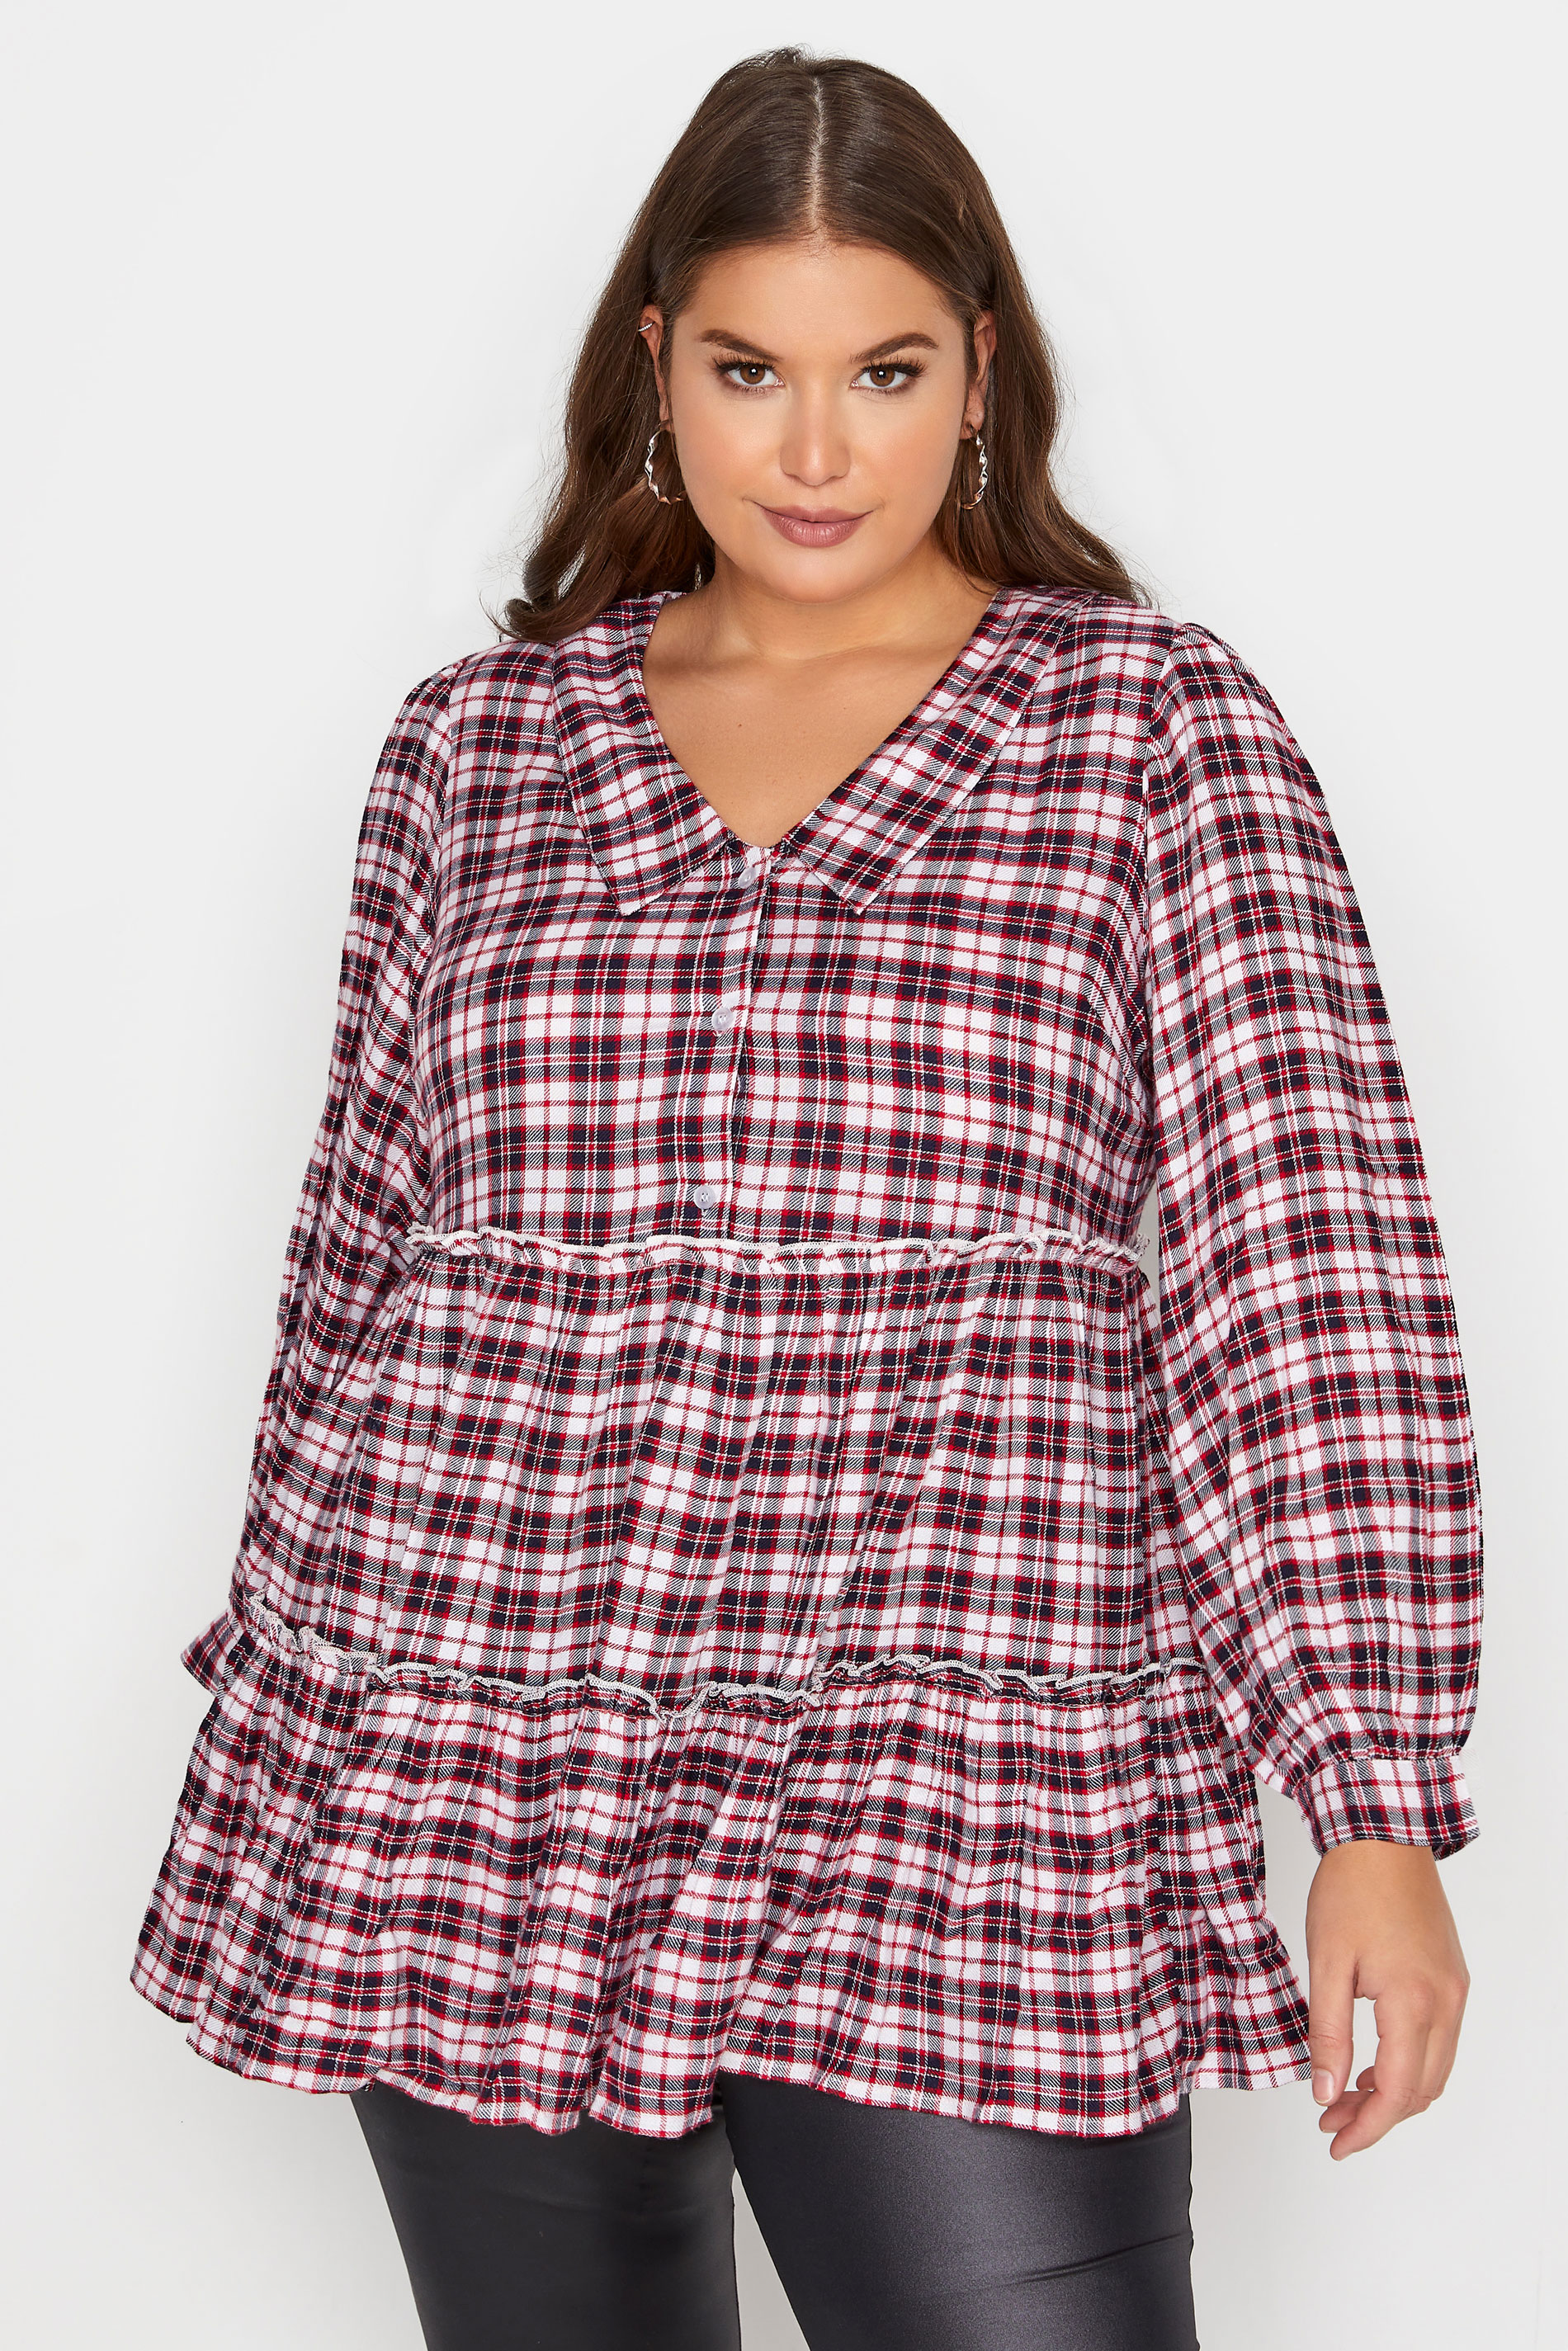 LIMITED COLLECTION White Check Tiered Top_A.jpg